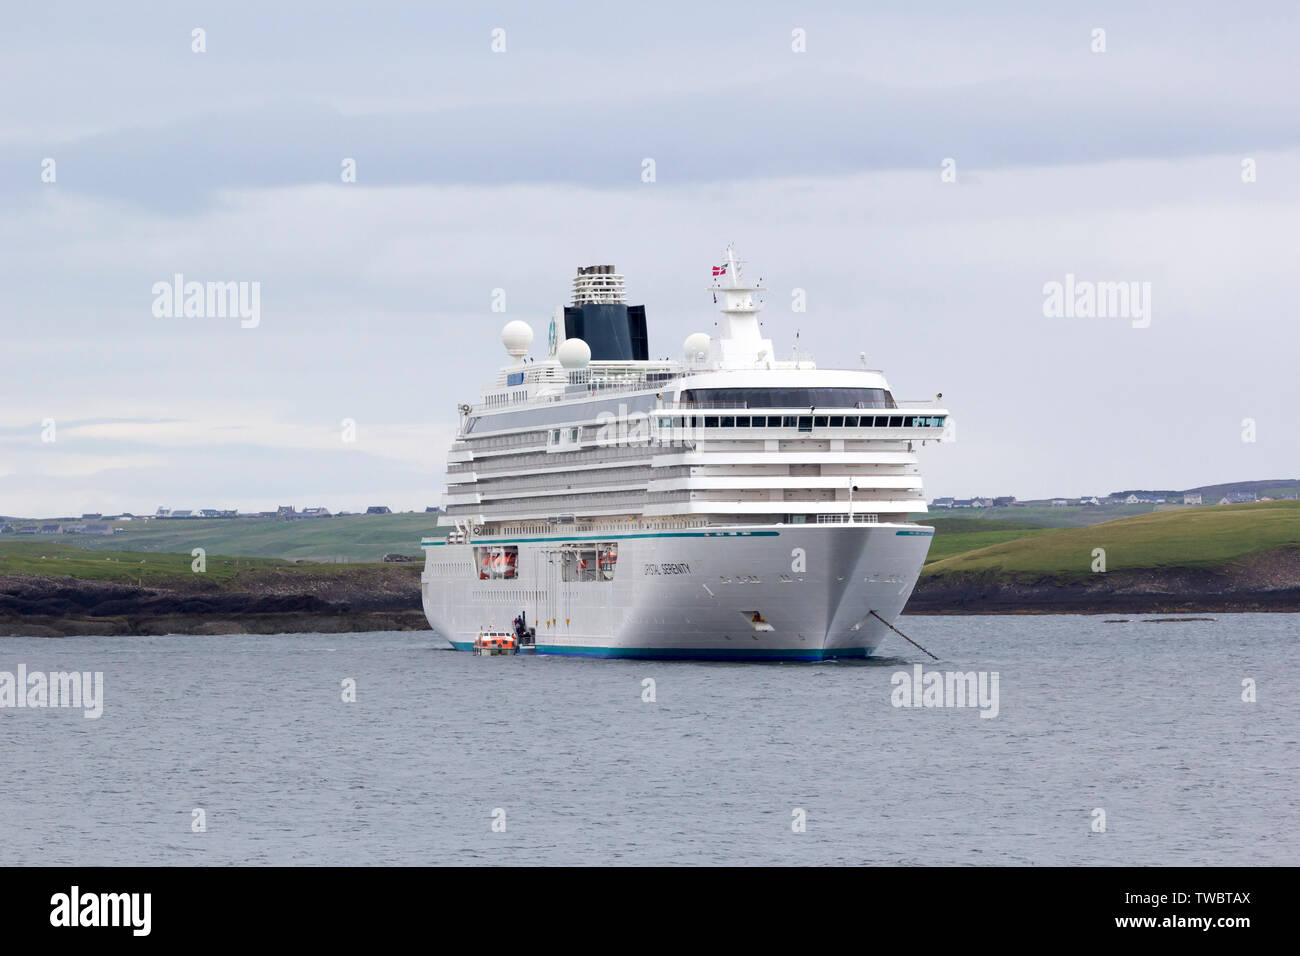 The Cruise Liner Crystal Serenity anchored off Stornoway, Isle of Lewis, Western Isles, Outer Hebrides, Scotland, United Kingdom Stock Photo